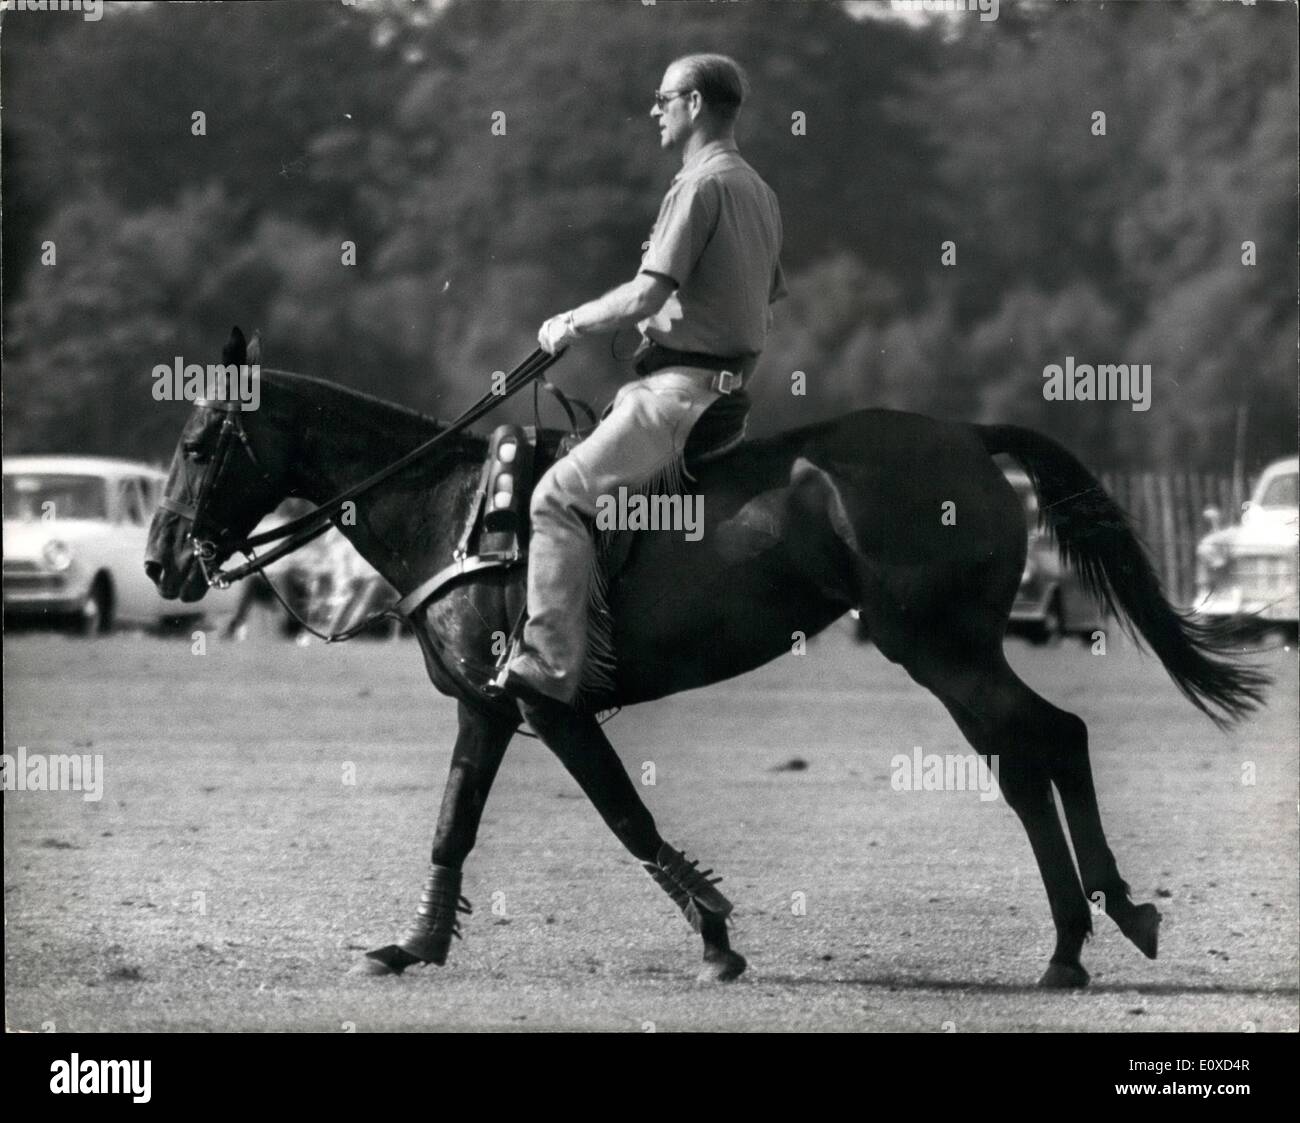 Jun. 06, 1966 - Prince Philip Umpires Polo Game At Windsor. Photo shows Prince Philip wears cowboy style ''chaps'' when he acted as umpire during a polo match on Smith's Lawn at Windsor today. Stock Photo